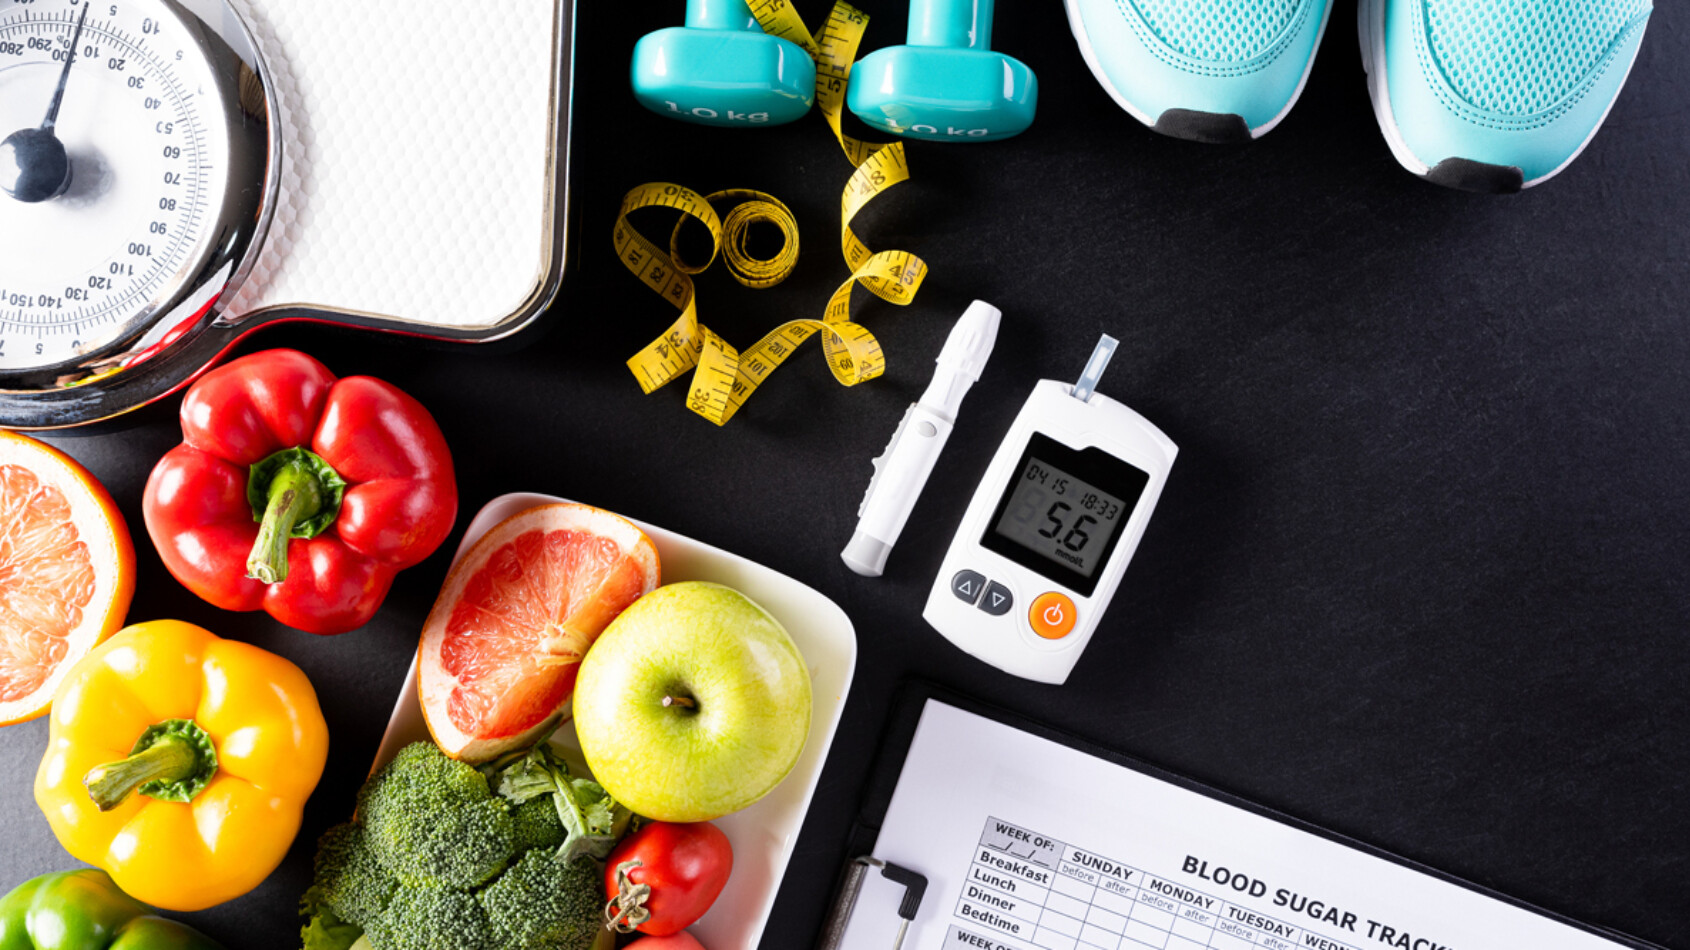 Diabetes prevention and management